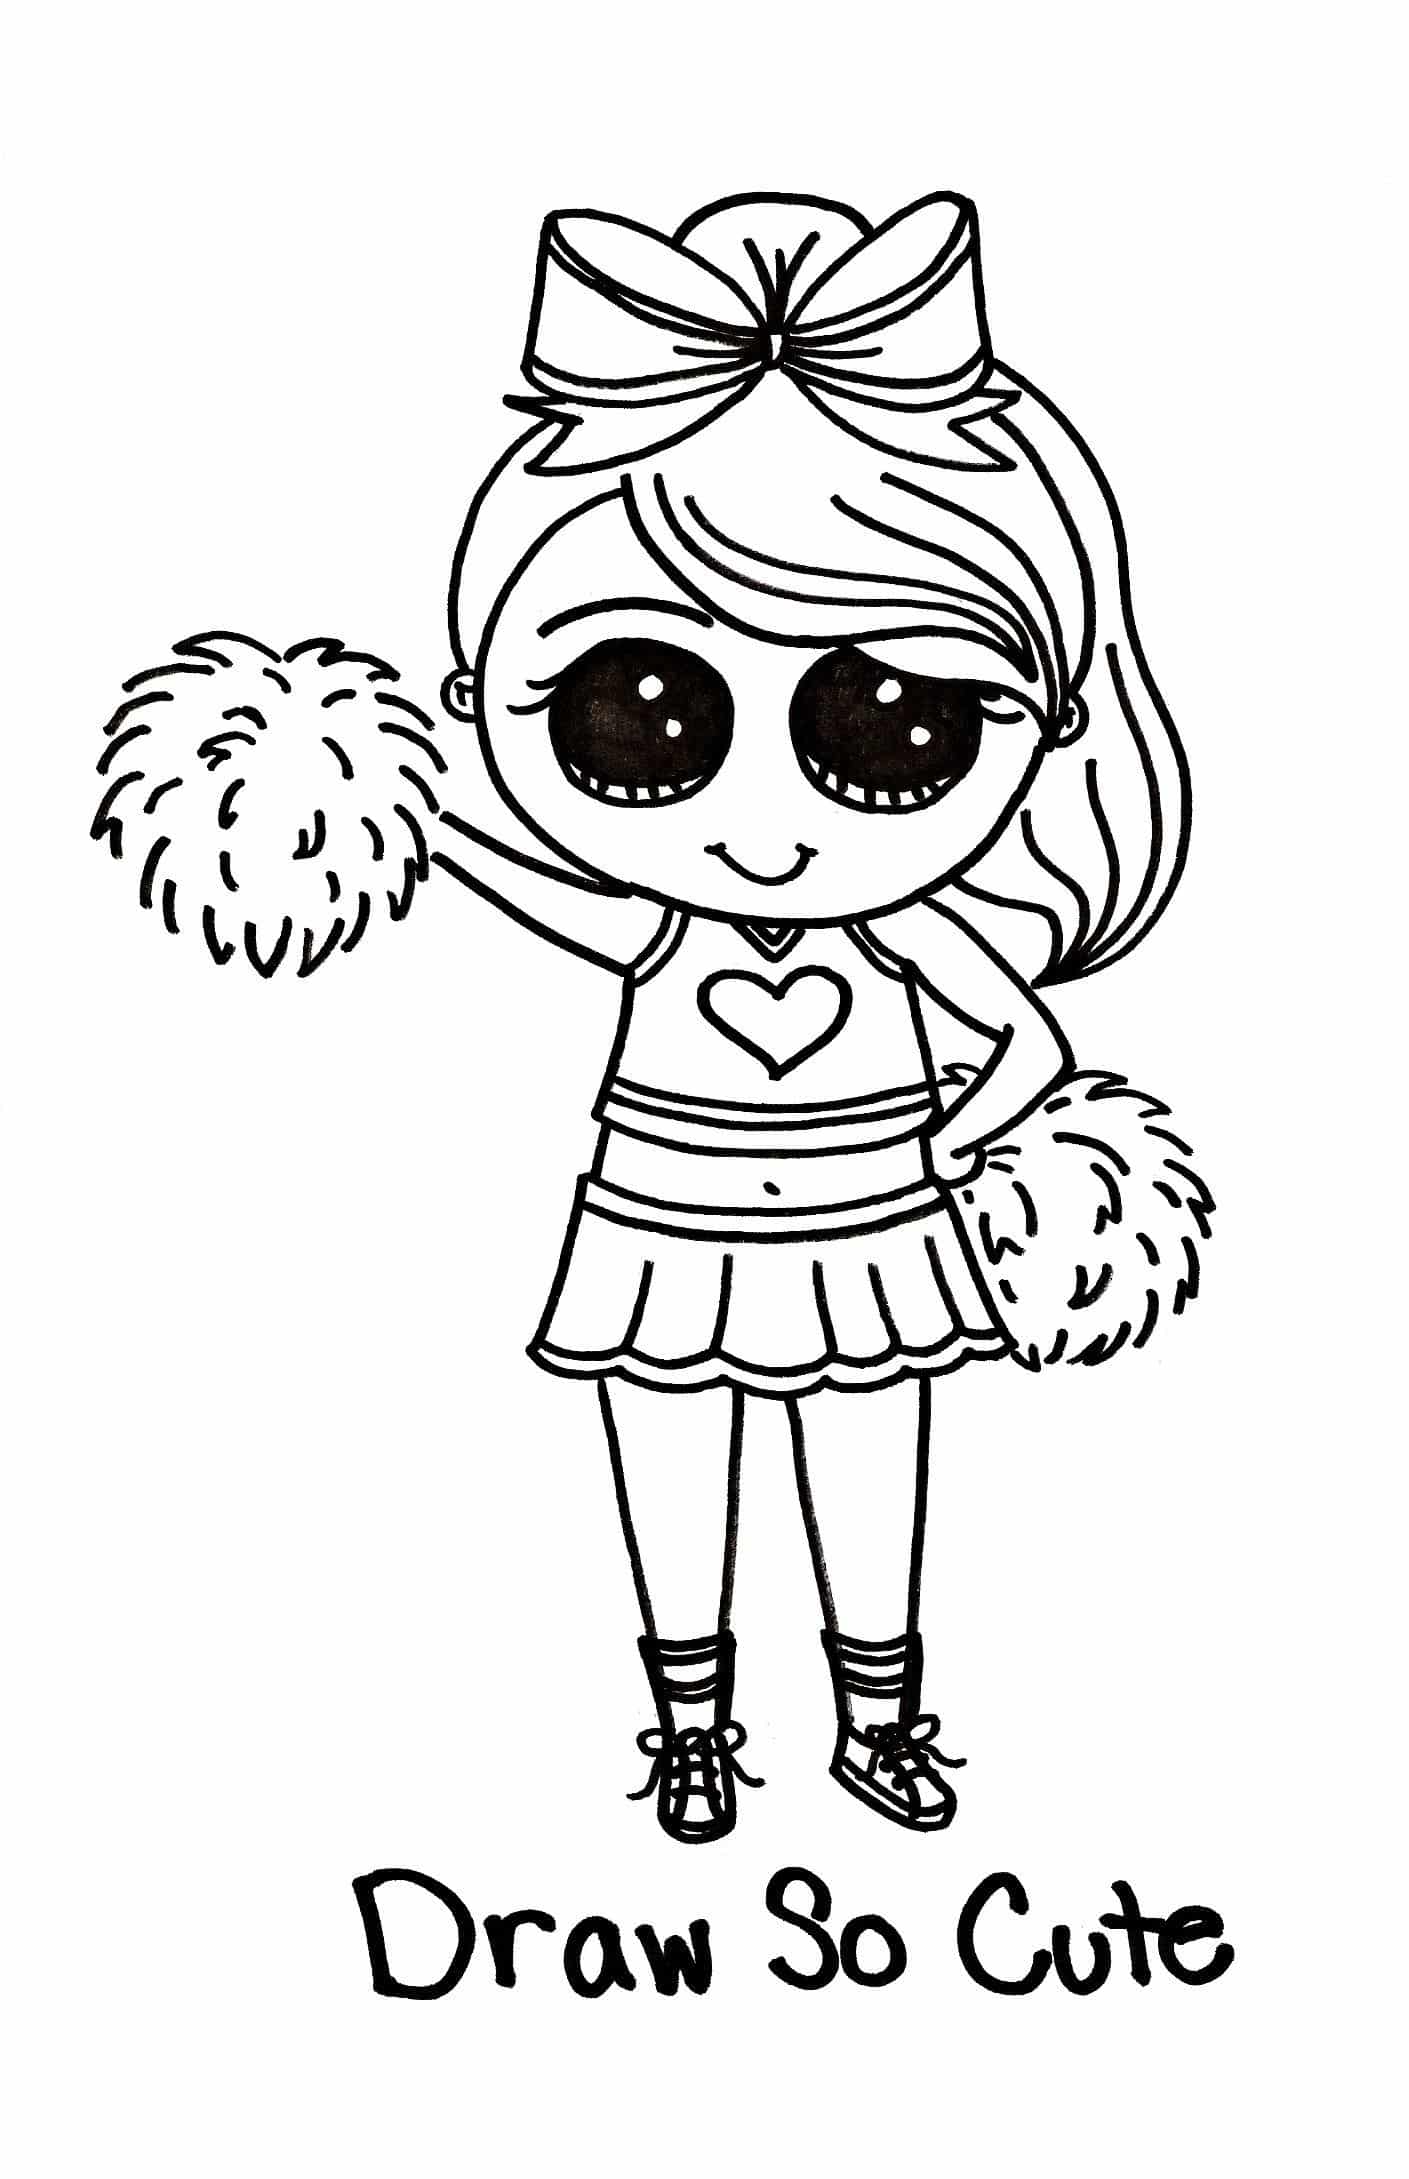 Cute Coloring Pages For Easter New Easter Draw So Cute Coloring Pages  Printable Fresh Draw So Cute Cheerleader Tipsy Scribbles A picture says a -  quotes that connect